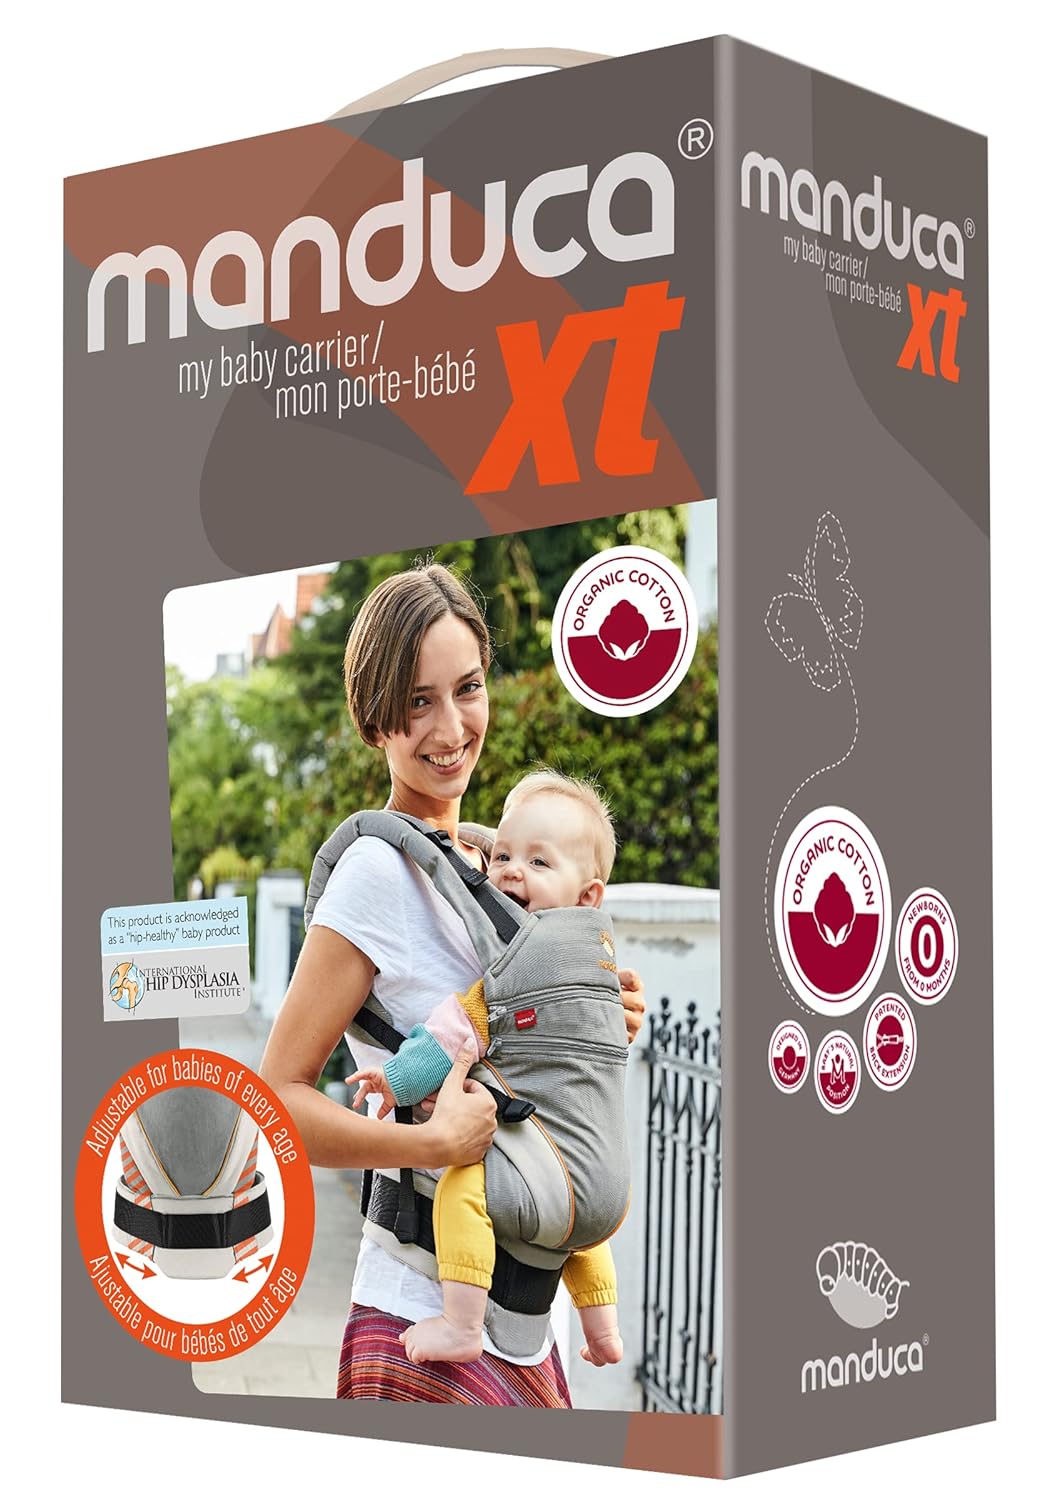 manduca XT/All-In-One Baby Carrier for Newborns - Organic Cotton, One Size, Grows with Your Child - Flexible Carrying System for Babies and Children from 3.5 to 20 kg